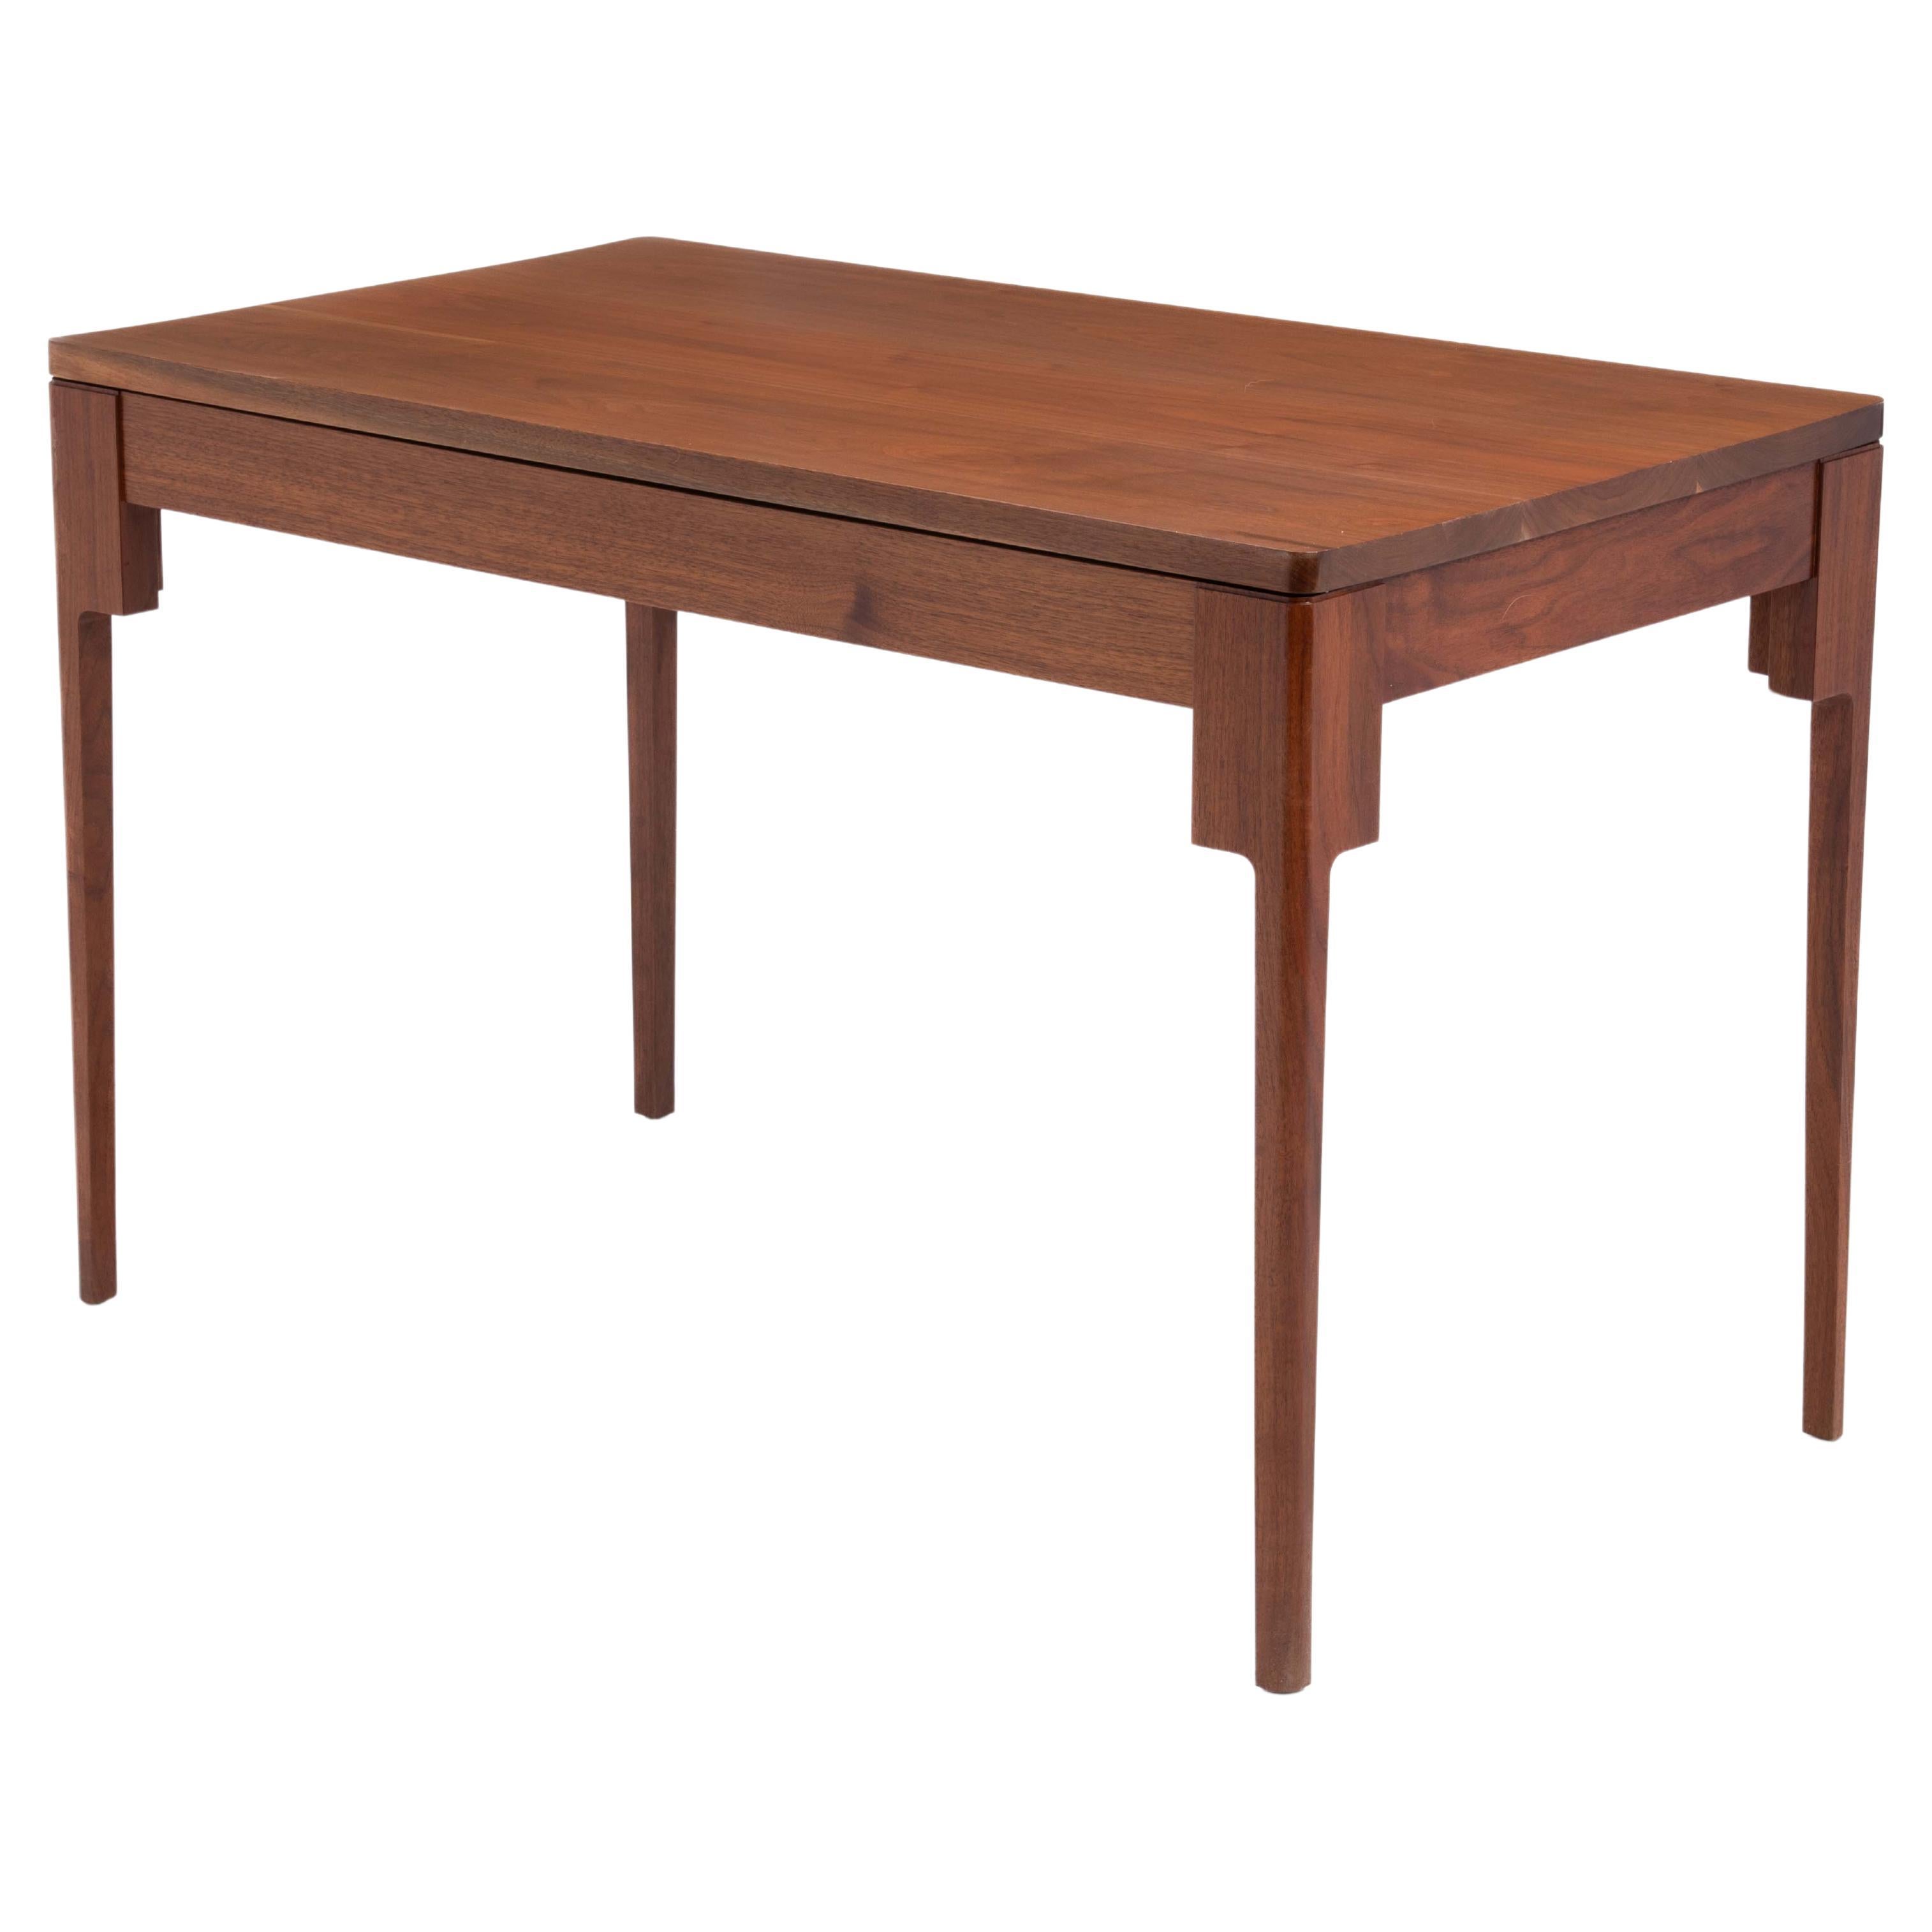 Bespoke Solid Walnut Desk Dining Table Floating Top Tapered Legs New Hope School For Sale